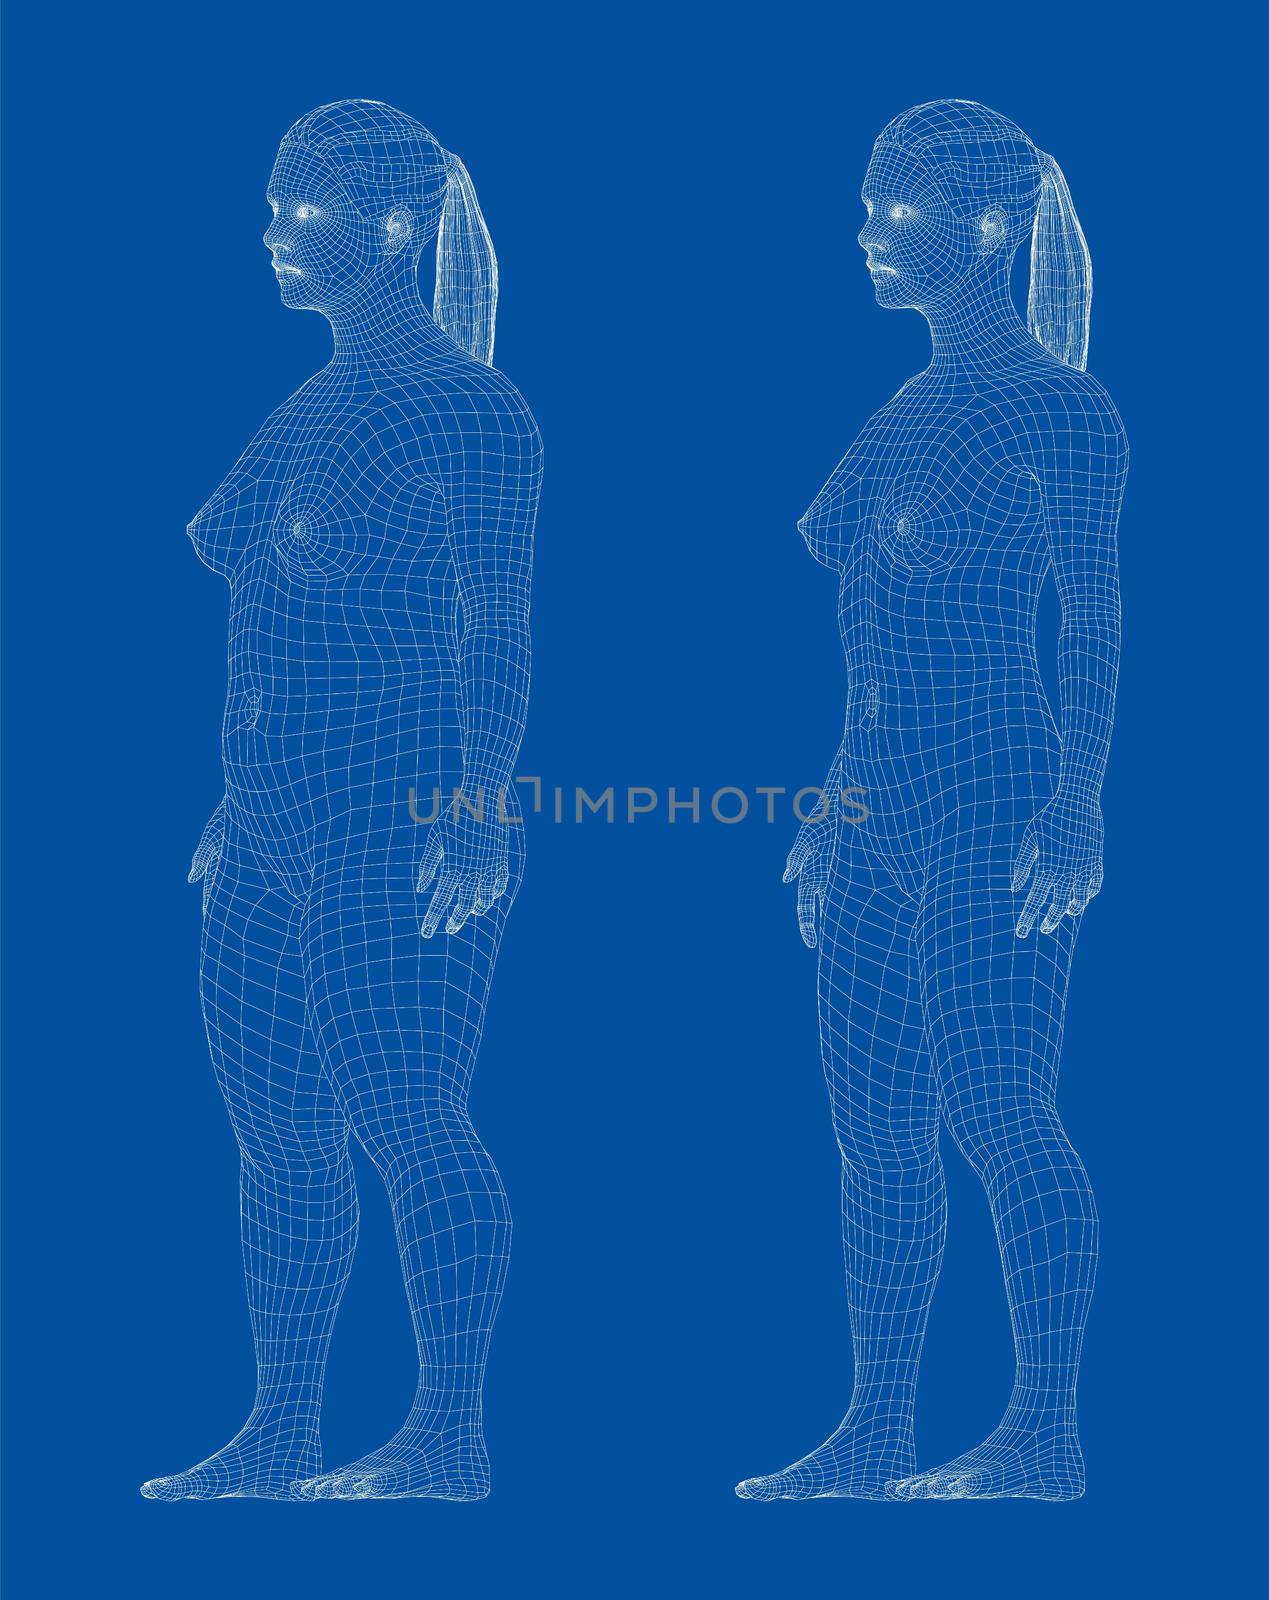 Fat and slim woman, before and after weight loss. 3d illustration